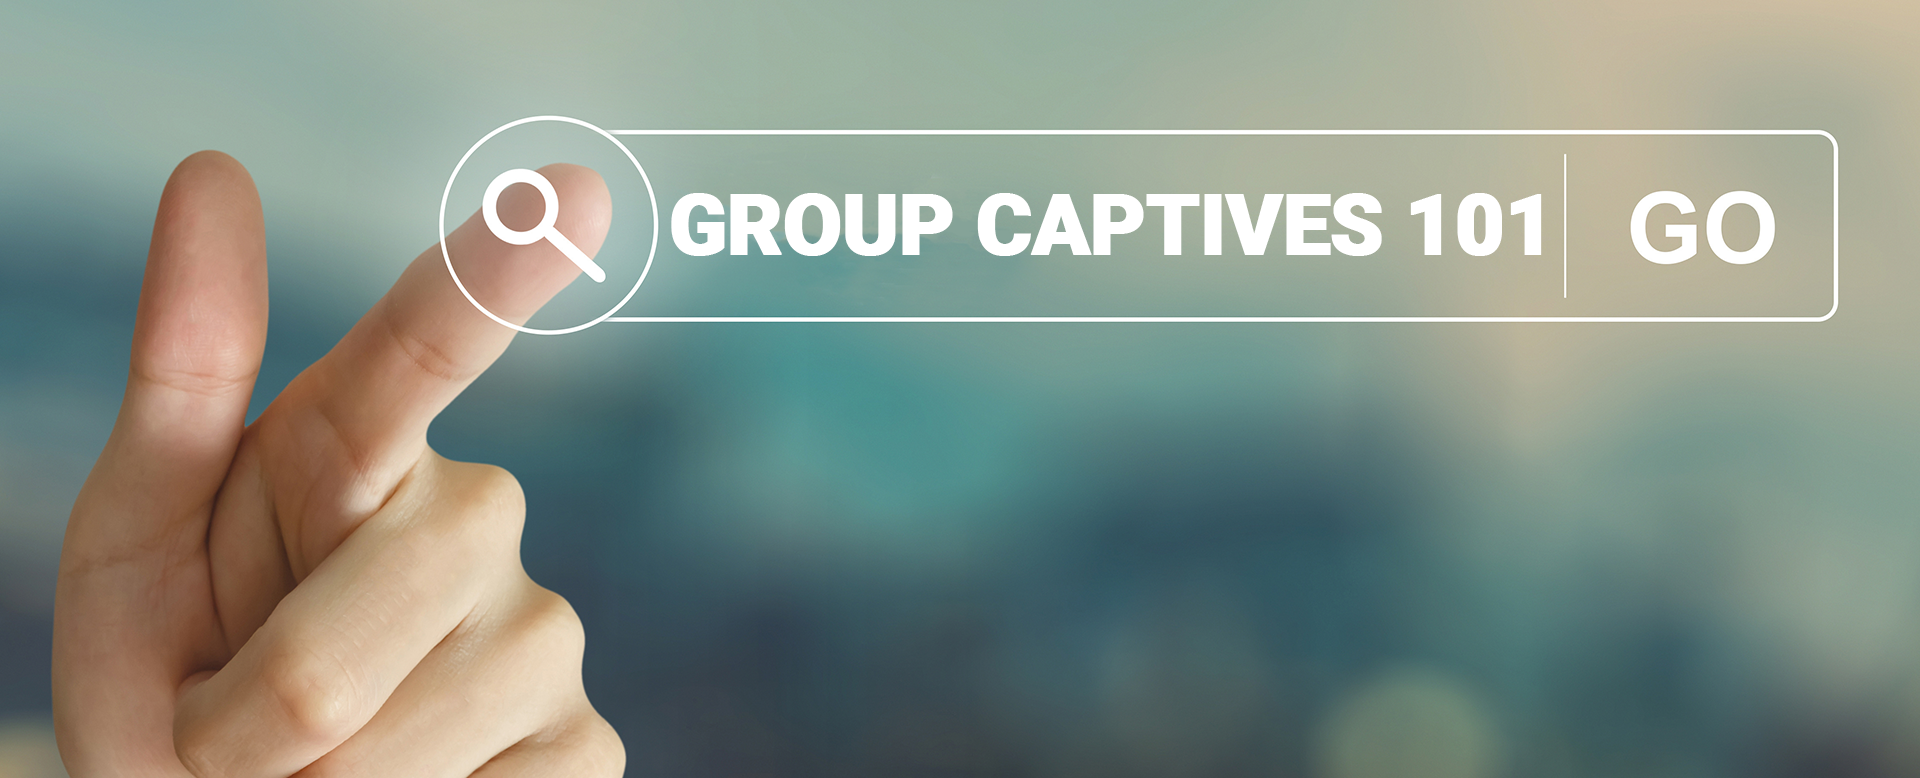 https://www.captiveresources.com/wp-content/uploads/2021/07/Group-Captive-101-Featured-Image.png